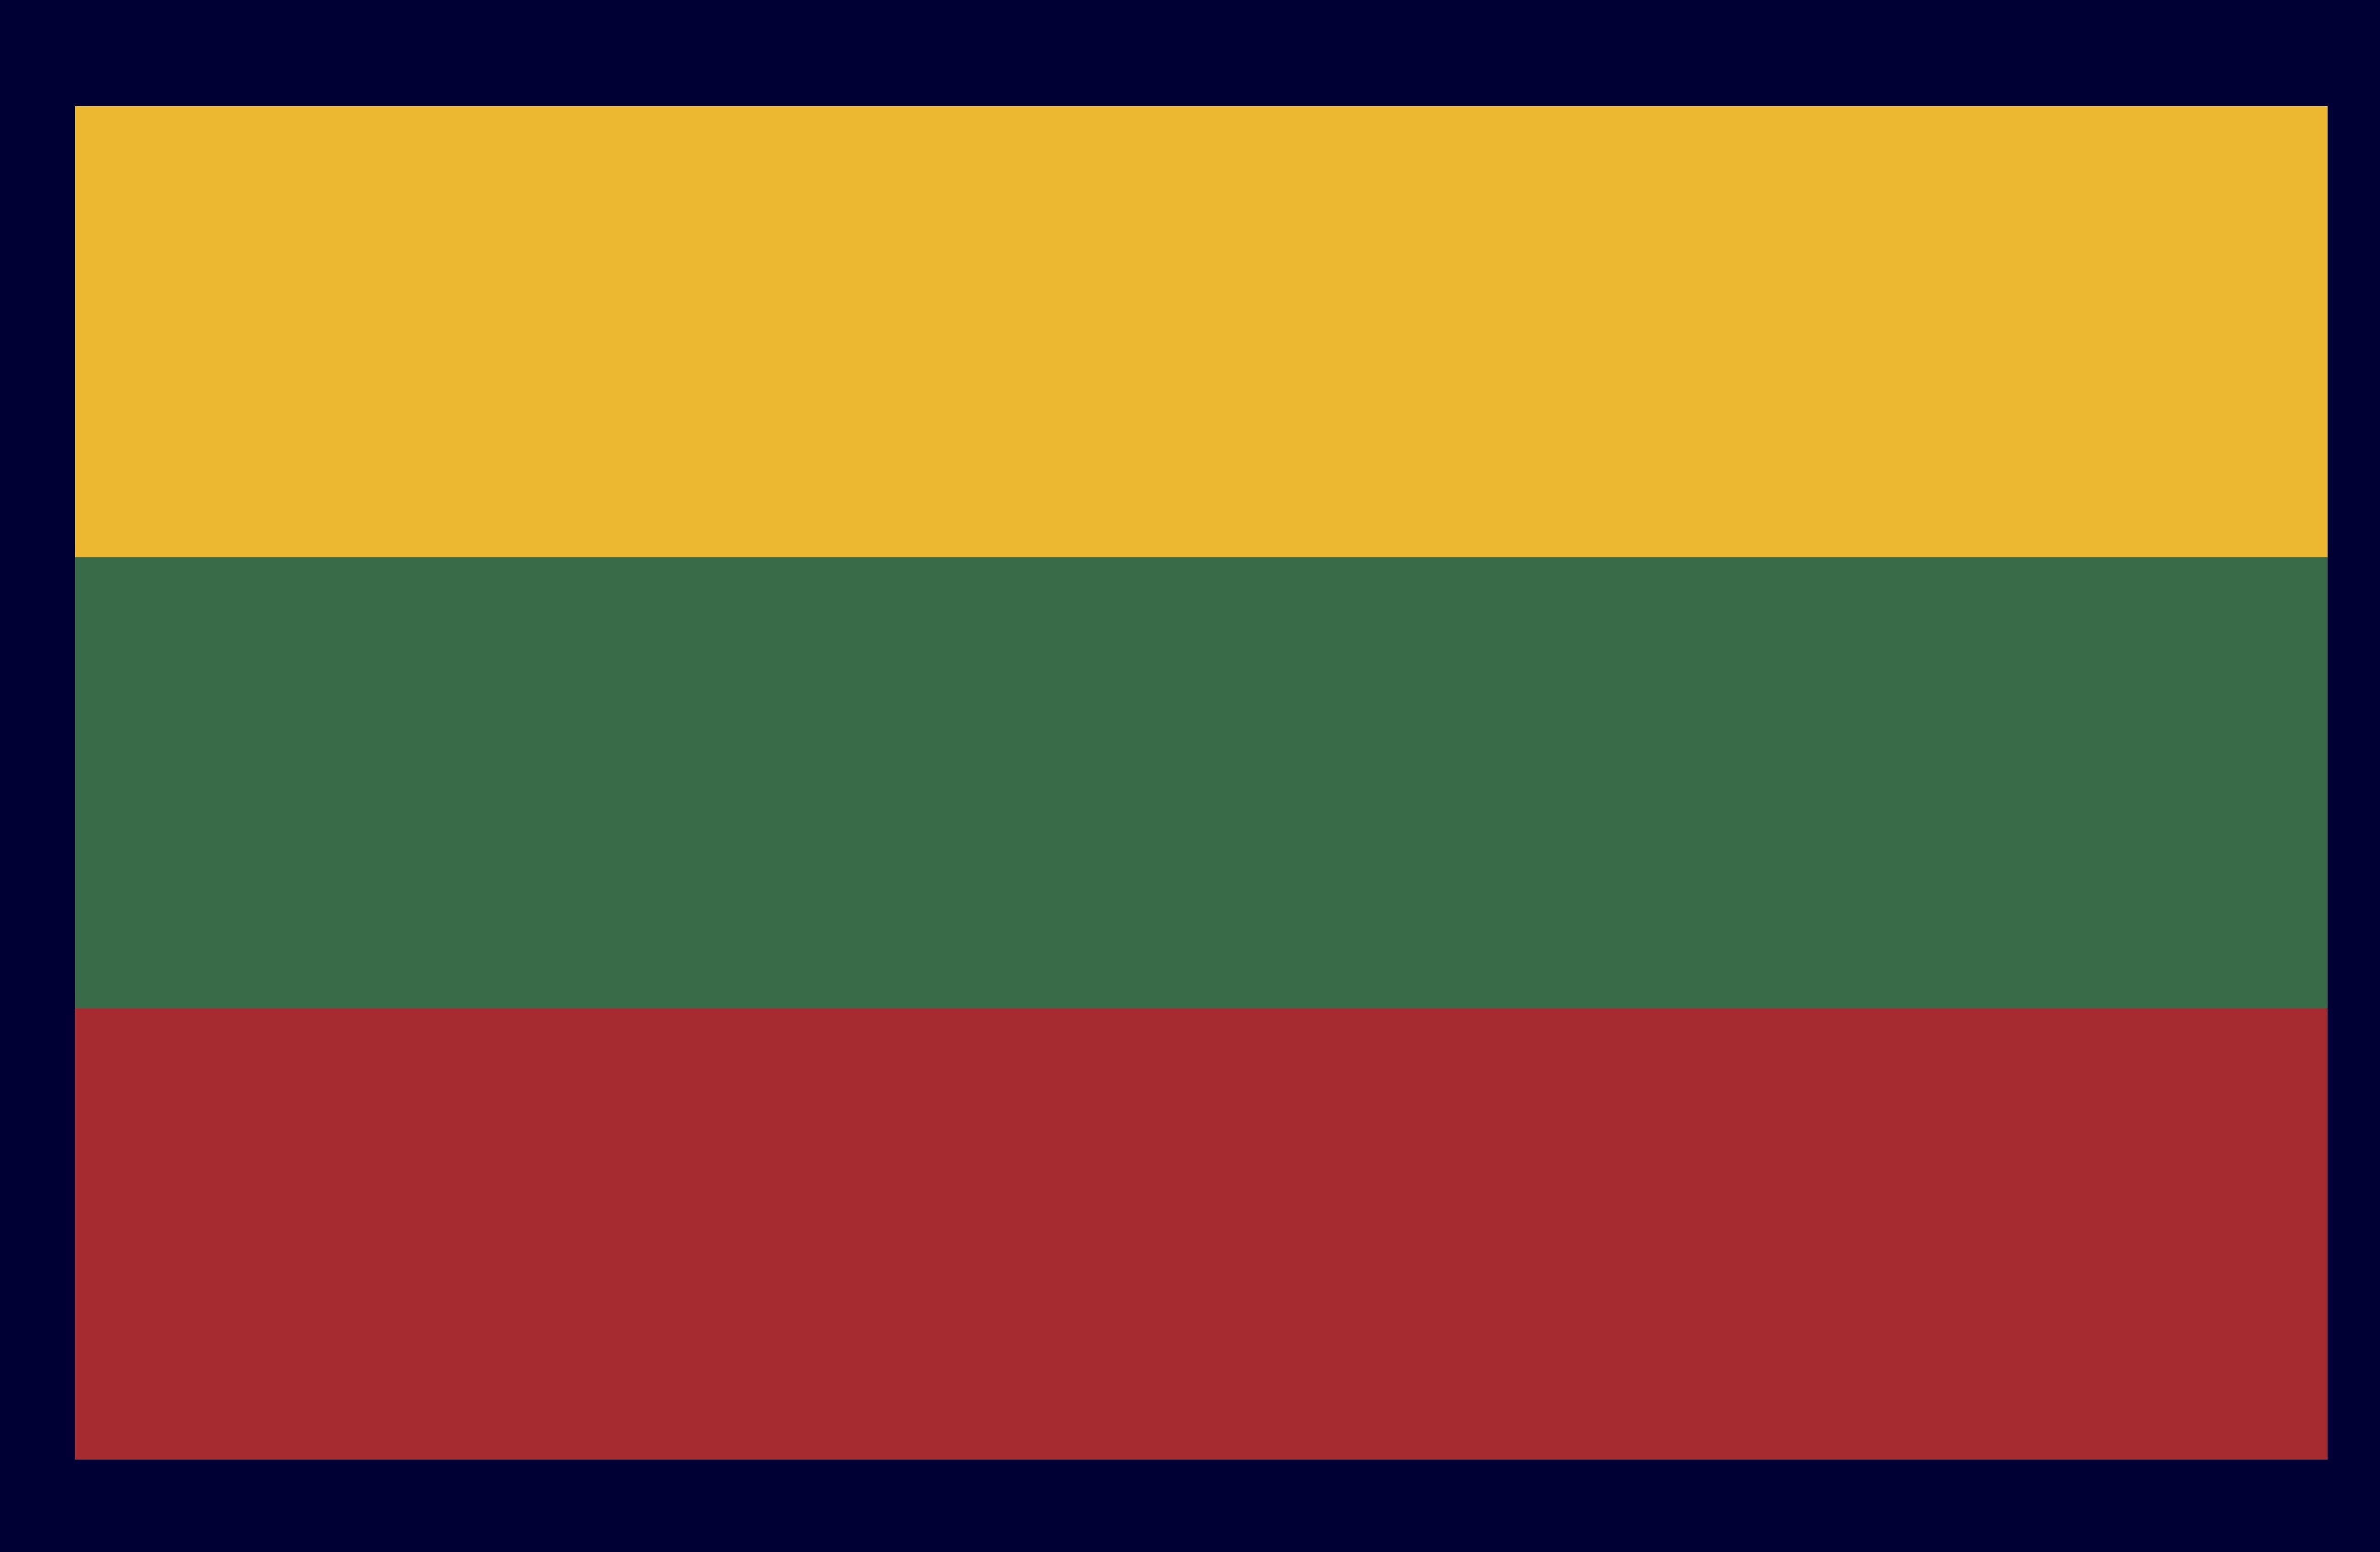 Jd lithuania flags wallpaper. PC